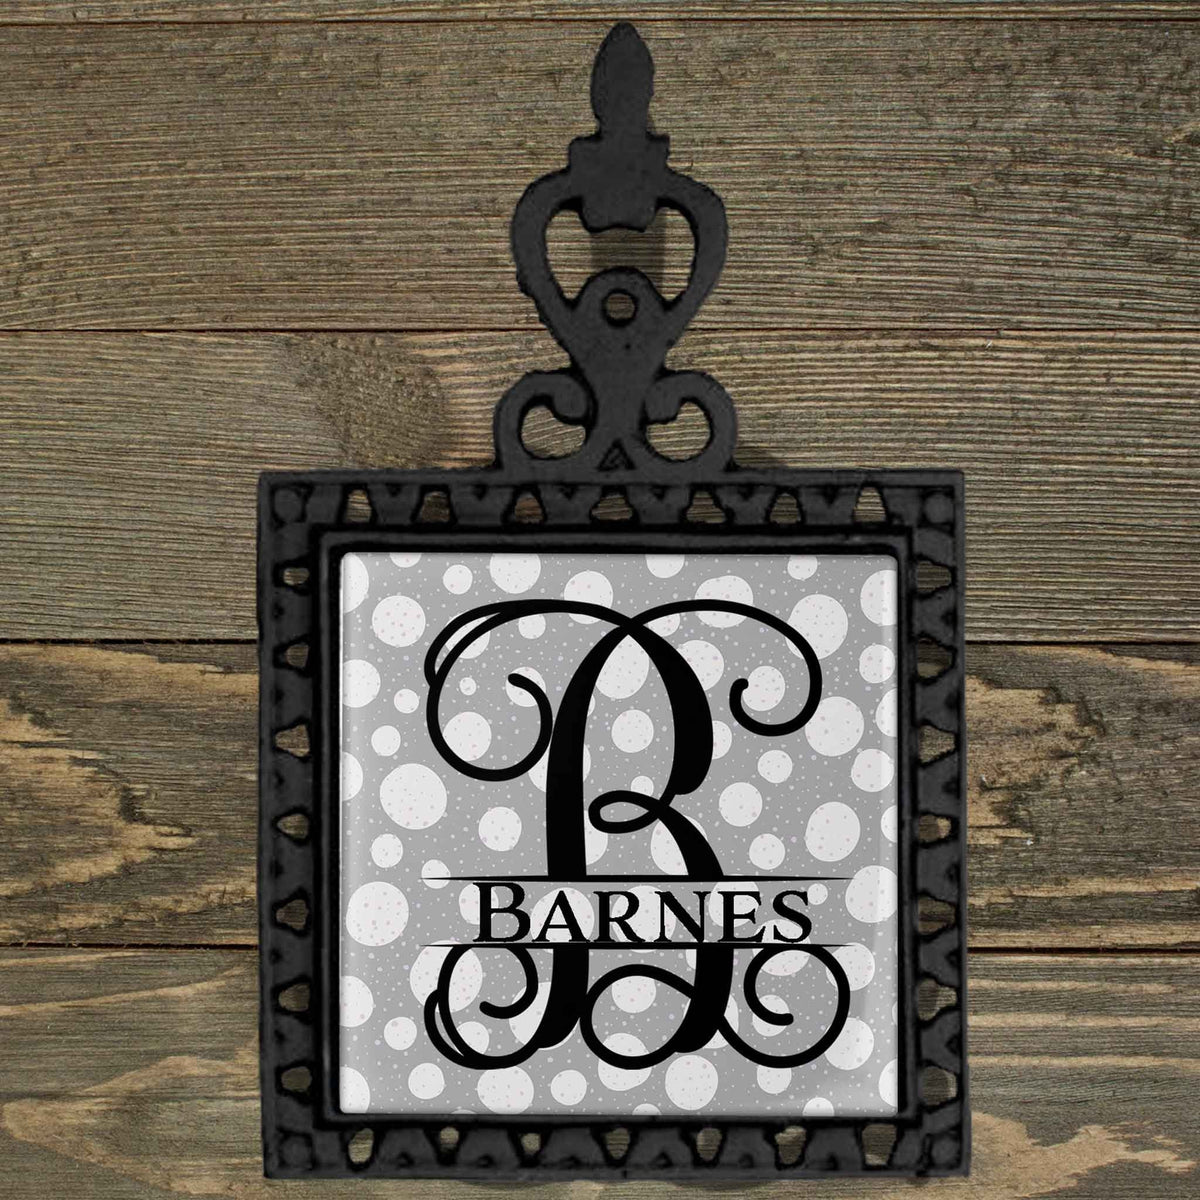 Personalized Iron Trivet | Custom Kitchen Gifts | Gray and White Polka Dots